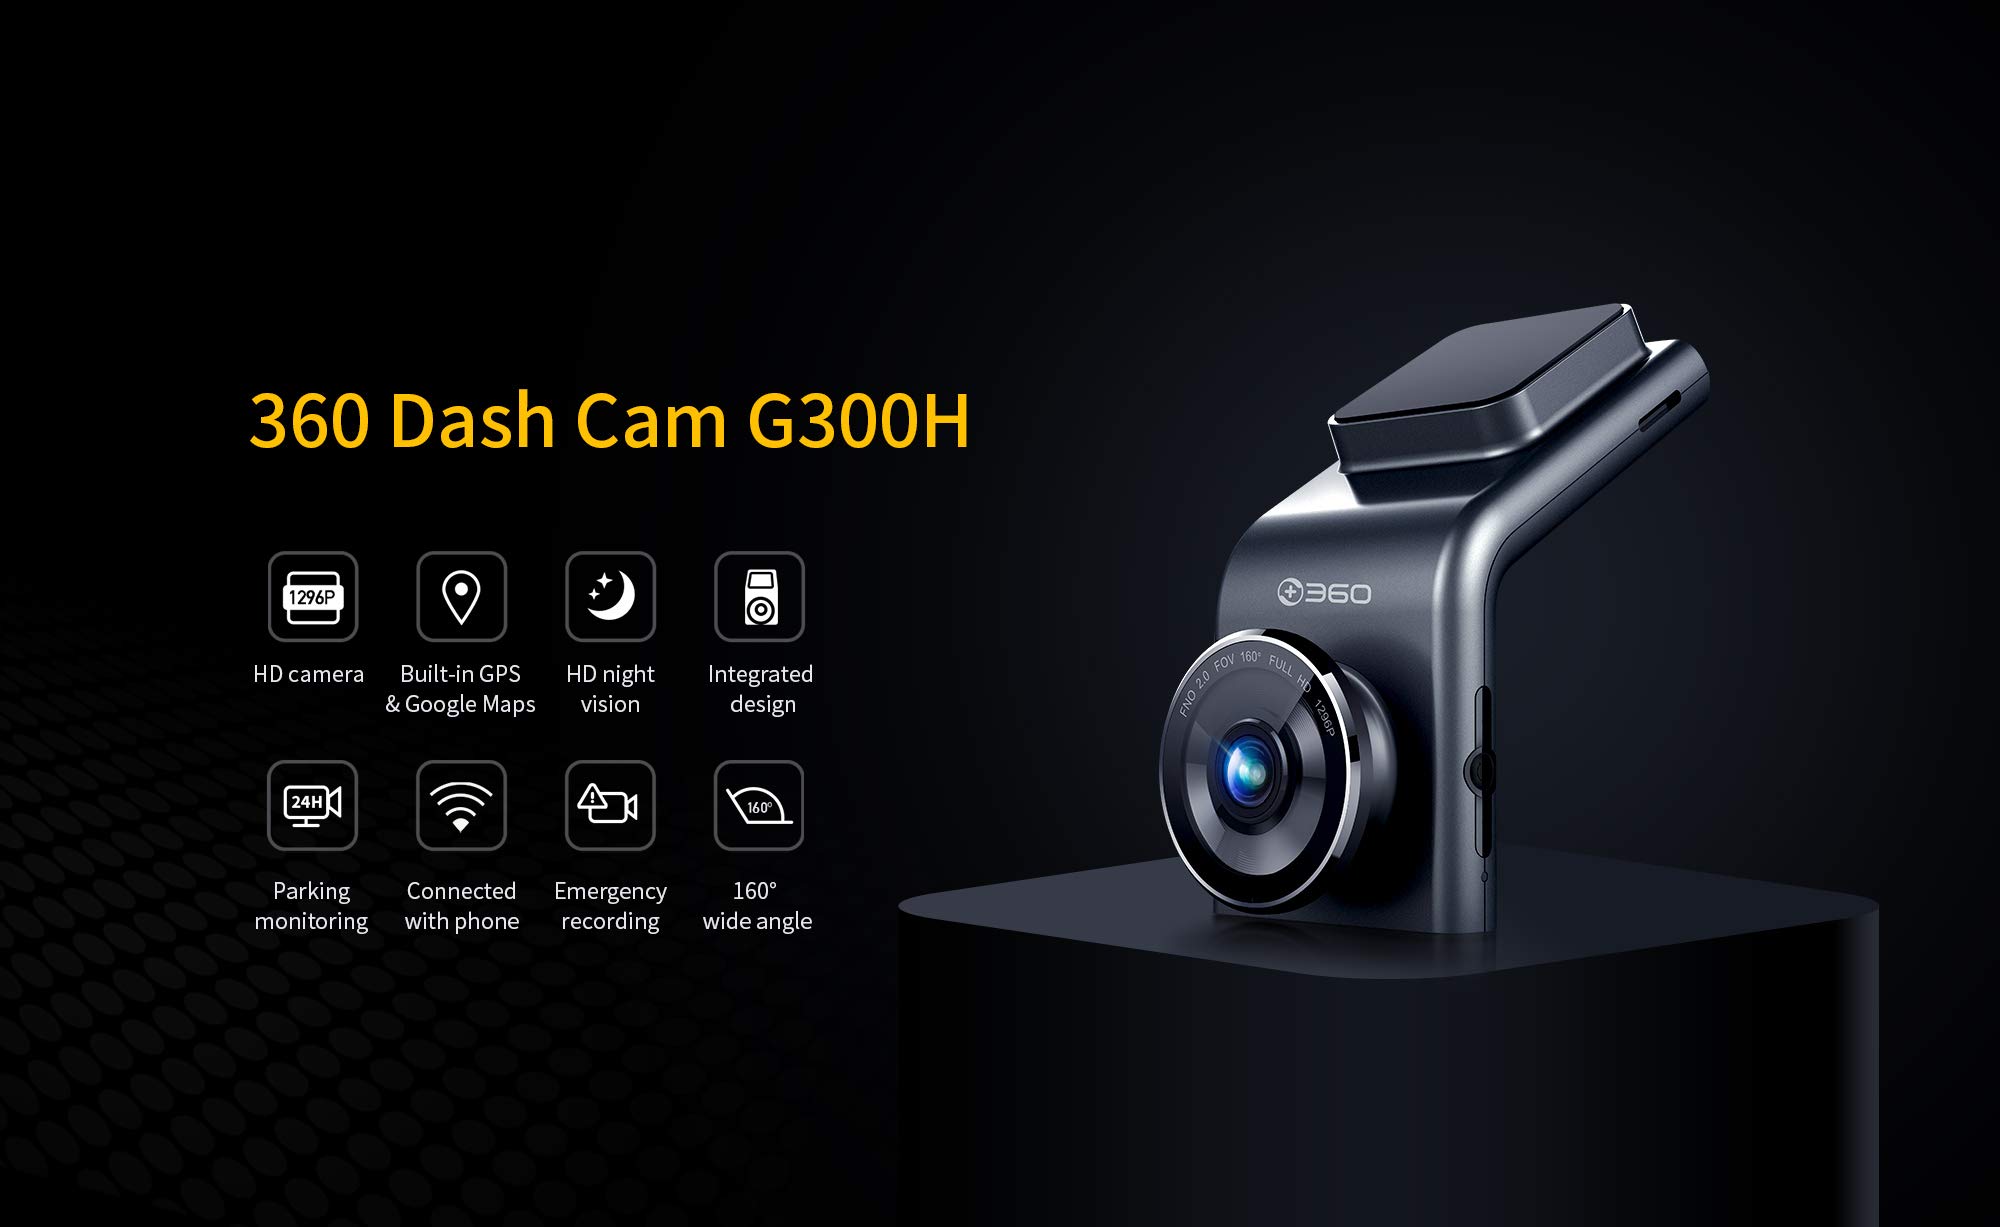 360 Dash Cam, 1296P FHD Car DashCam, 160° Wide Angle Car Camera, Color Night Vision, Built in WiFi GPS, Support Google Map, 24hr Motion Detection Parking Mode, Loop Recording(SD Card Not Included)